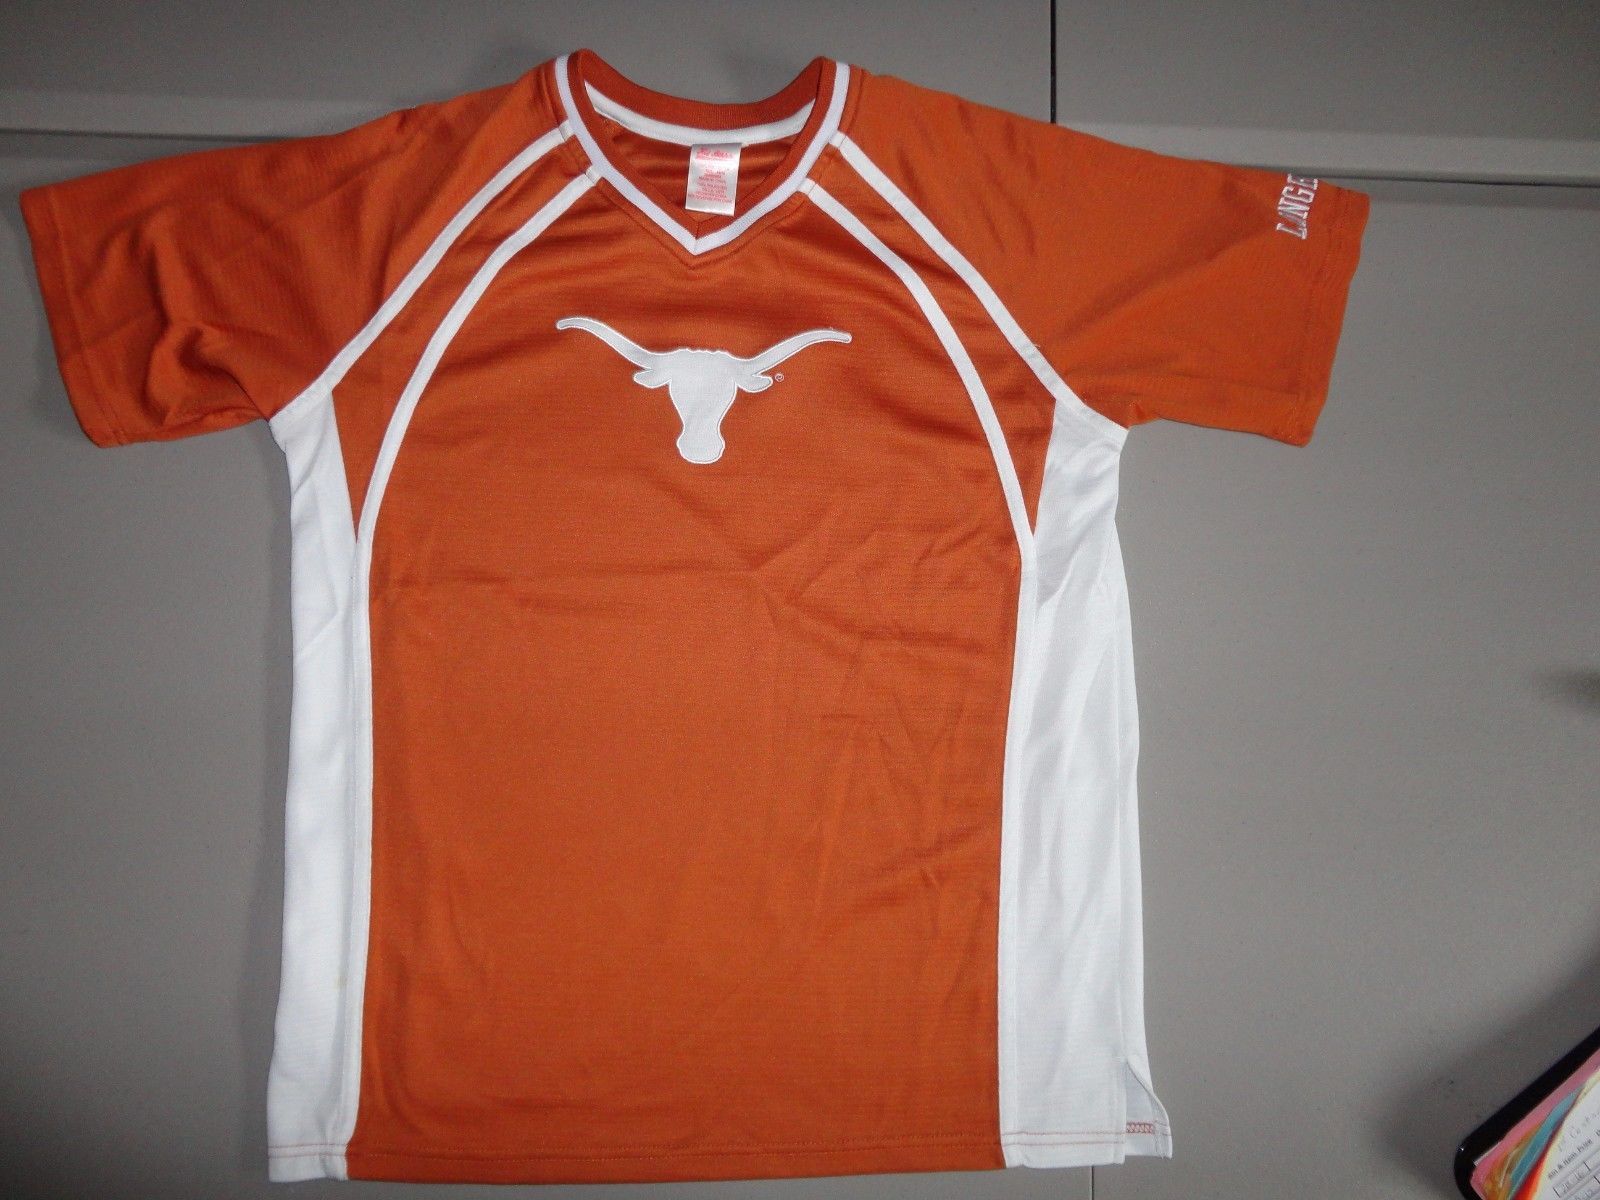 Primary image for Orange Sewn BEVO Texas Longhorns NCAA College Football Jersey Youth 14-16 EXCEL